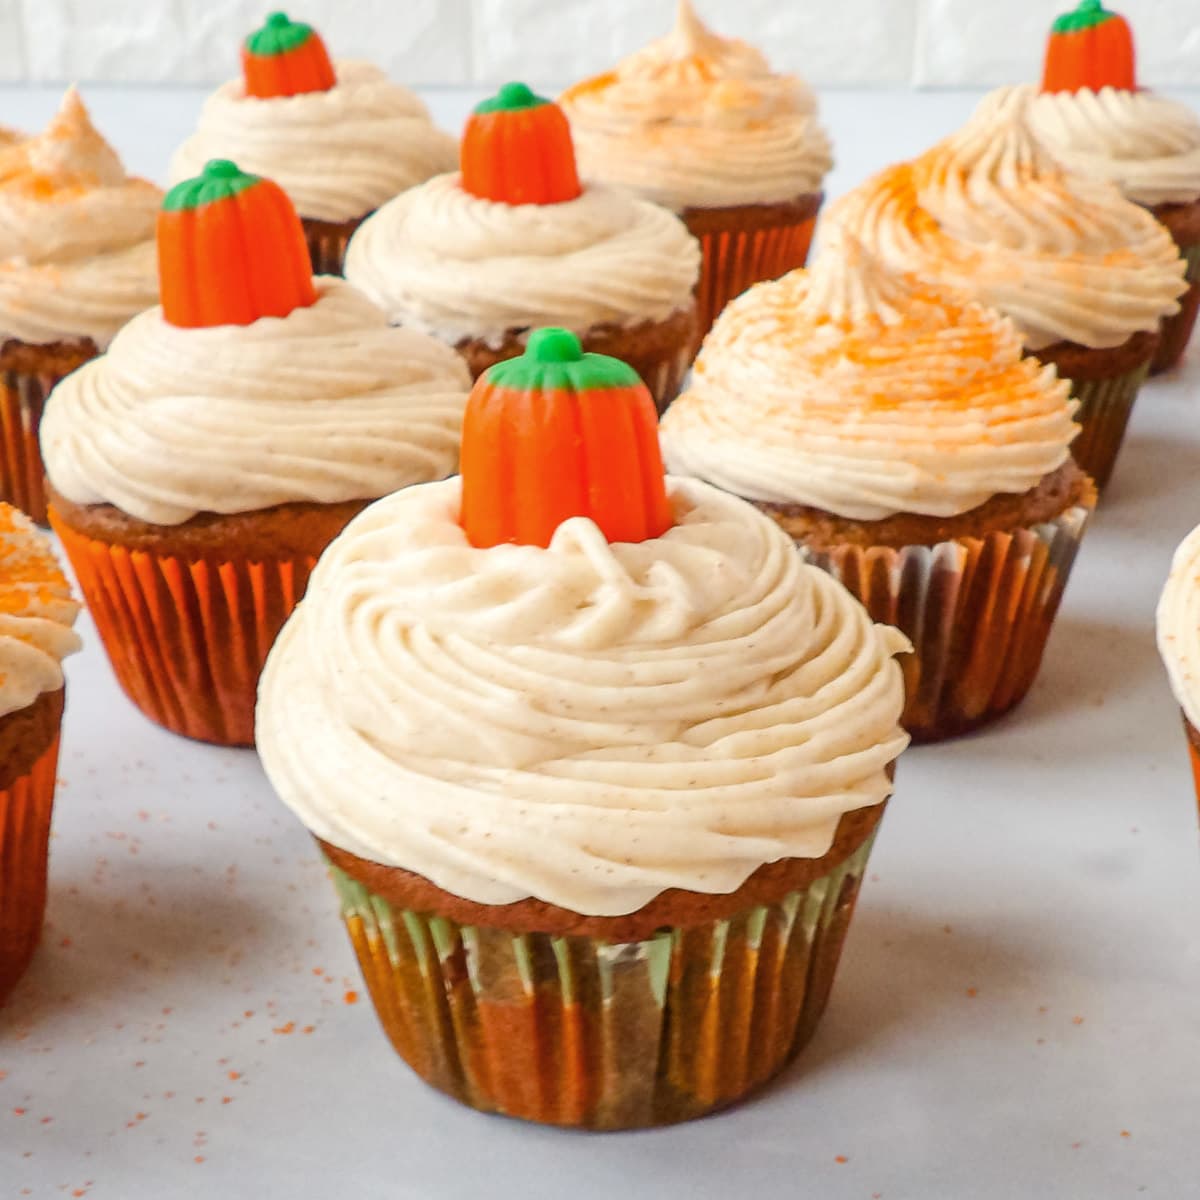 Pumpkin cupcakes with cinnamon cream cheese frosting decorated with candy pumpkins and orange sprinkles.